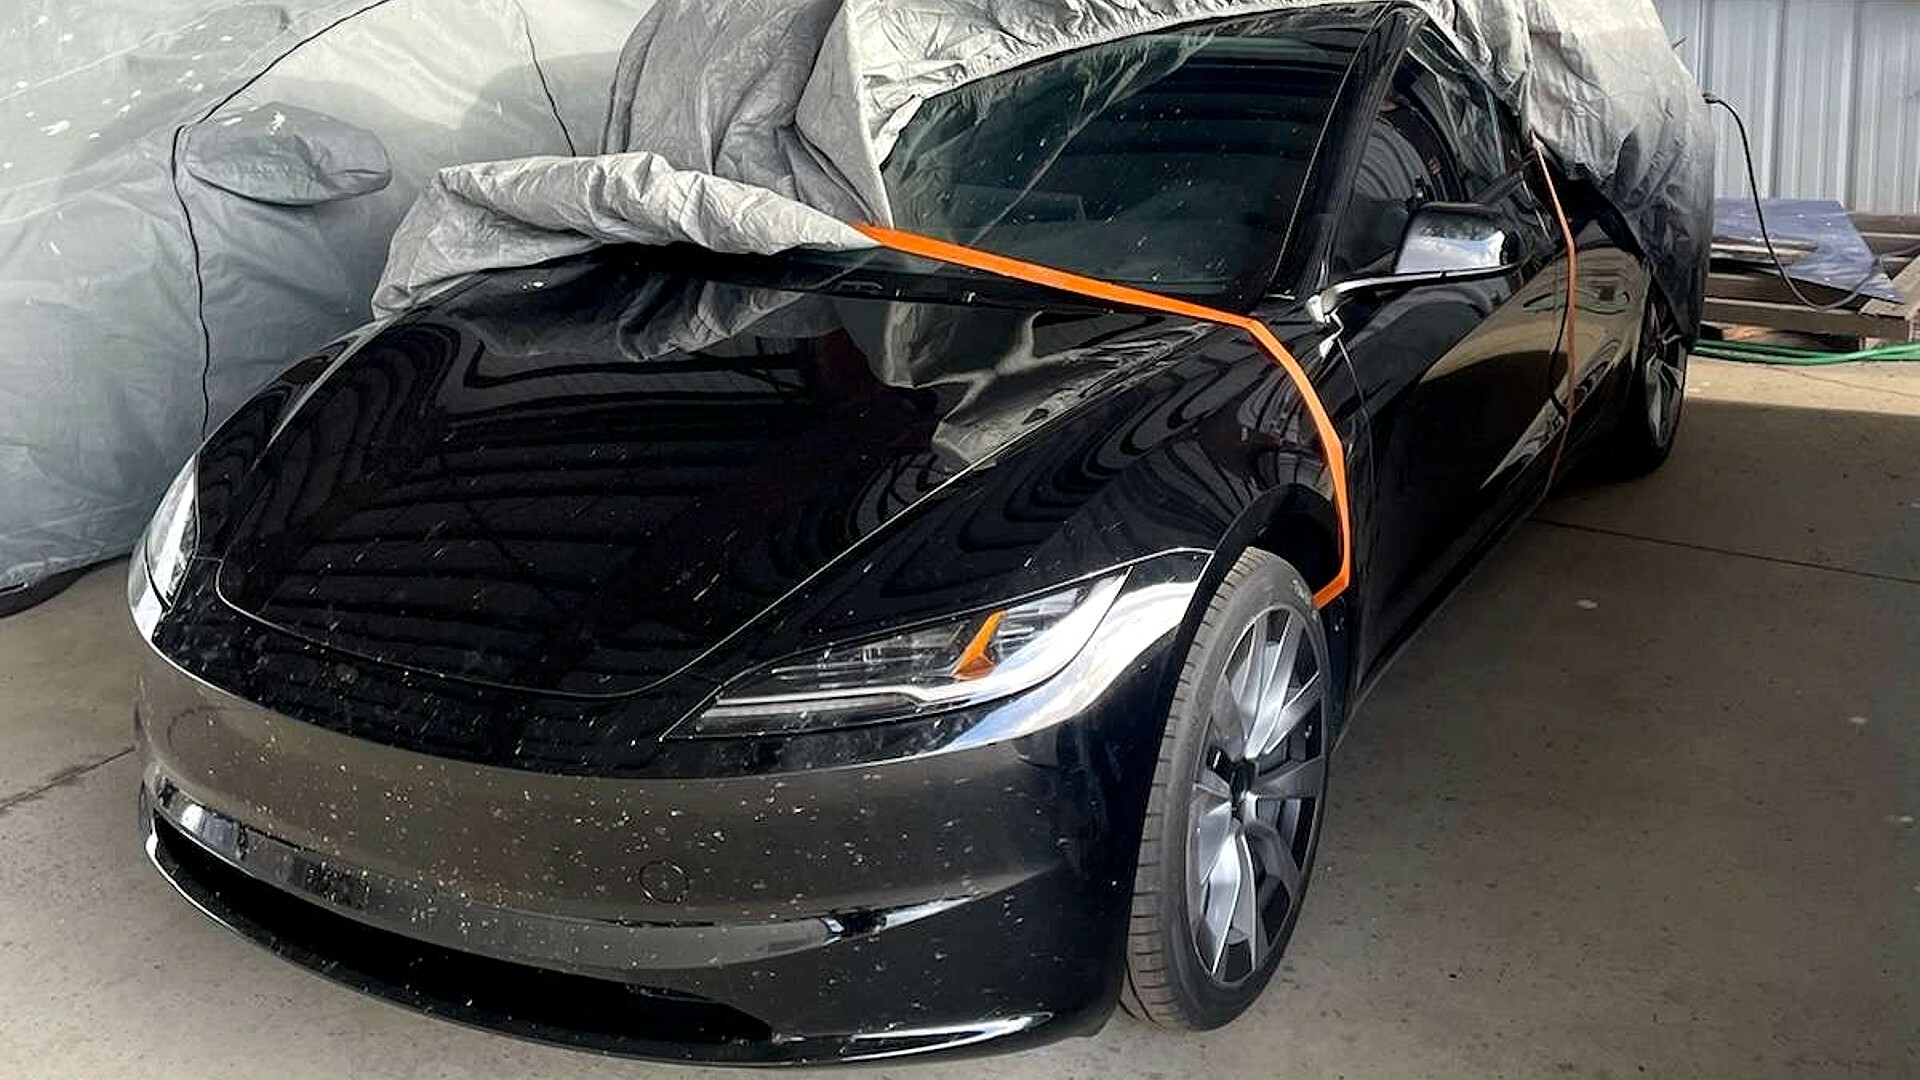 Photos: Here's What Tesla Changed on the New U.S.-Bound Model 3